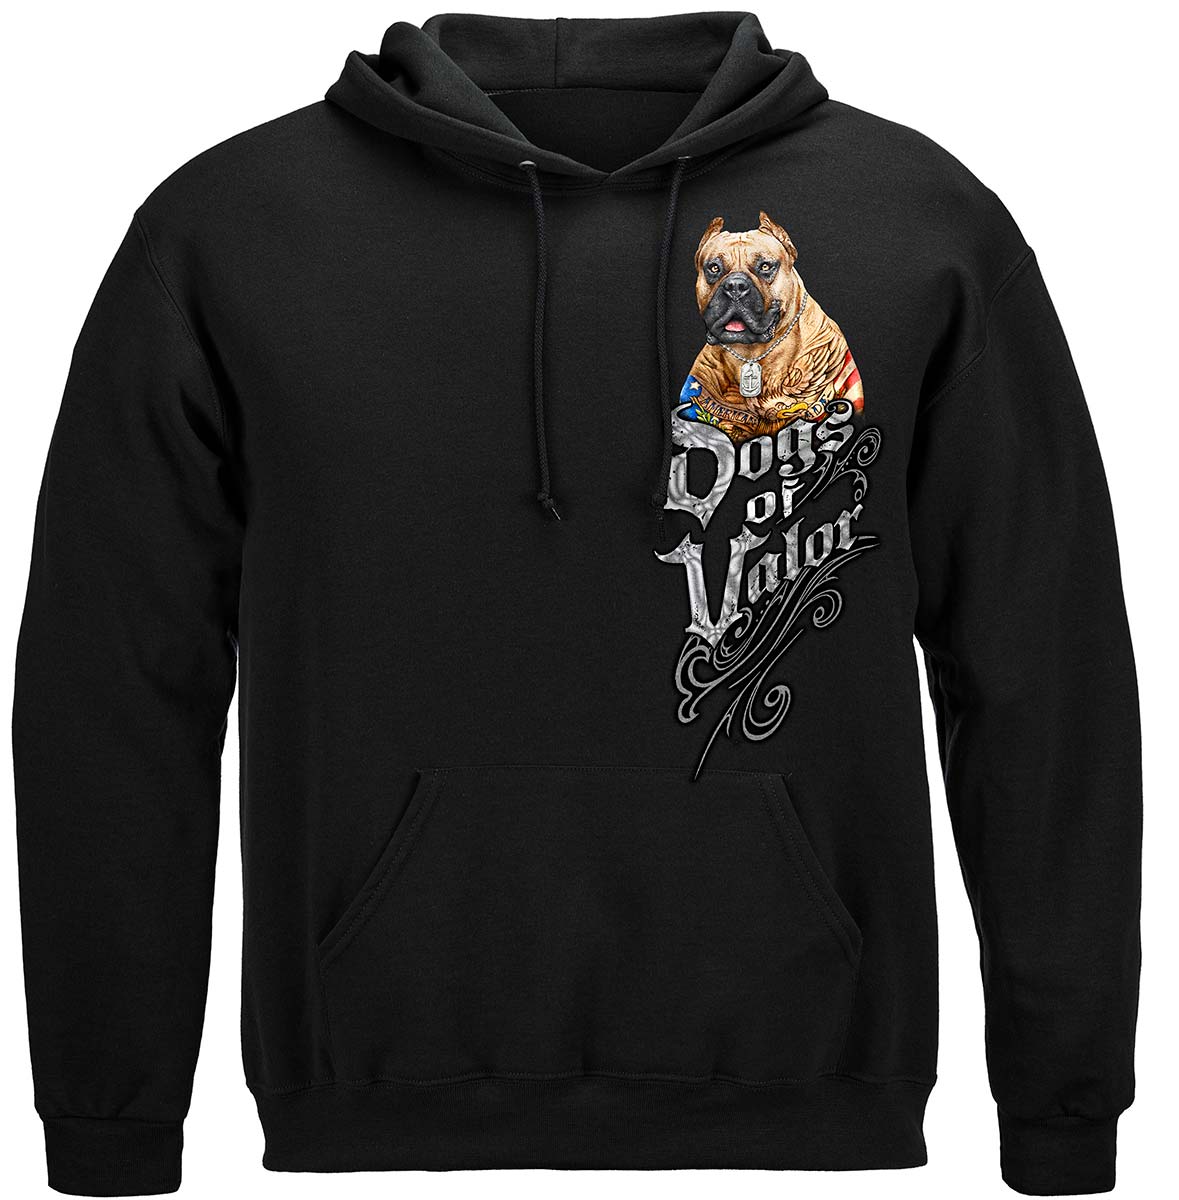 Dogs Of Valor American Made Pit Bull Premium T-Shirt